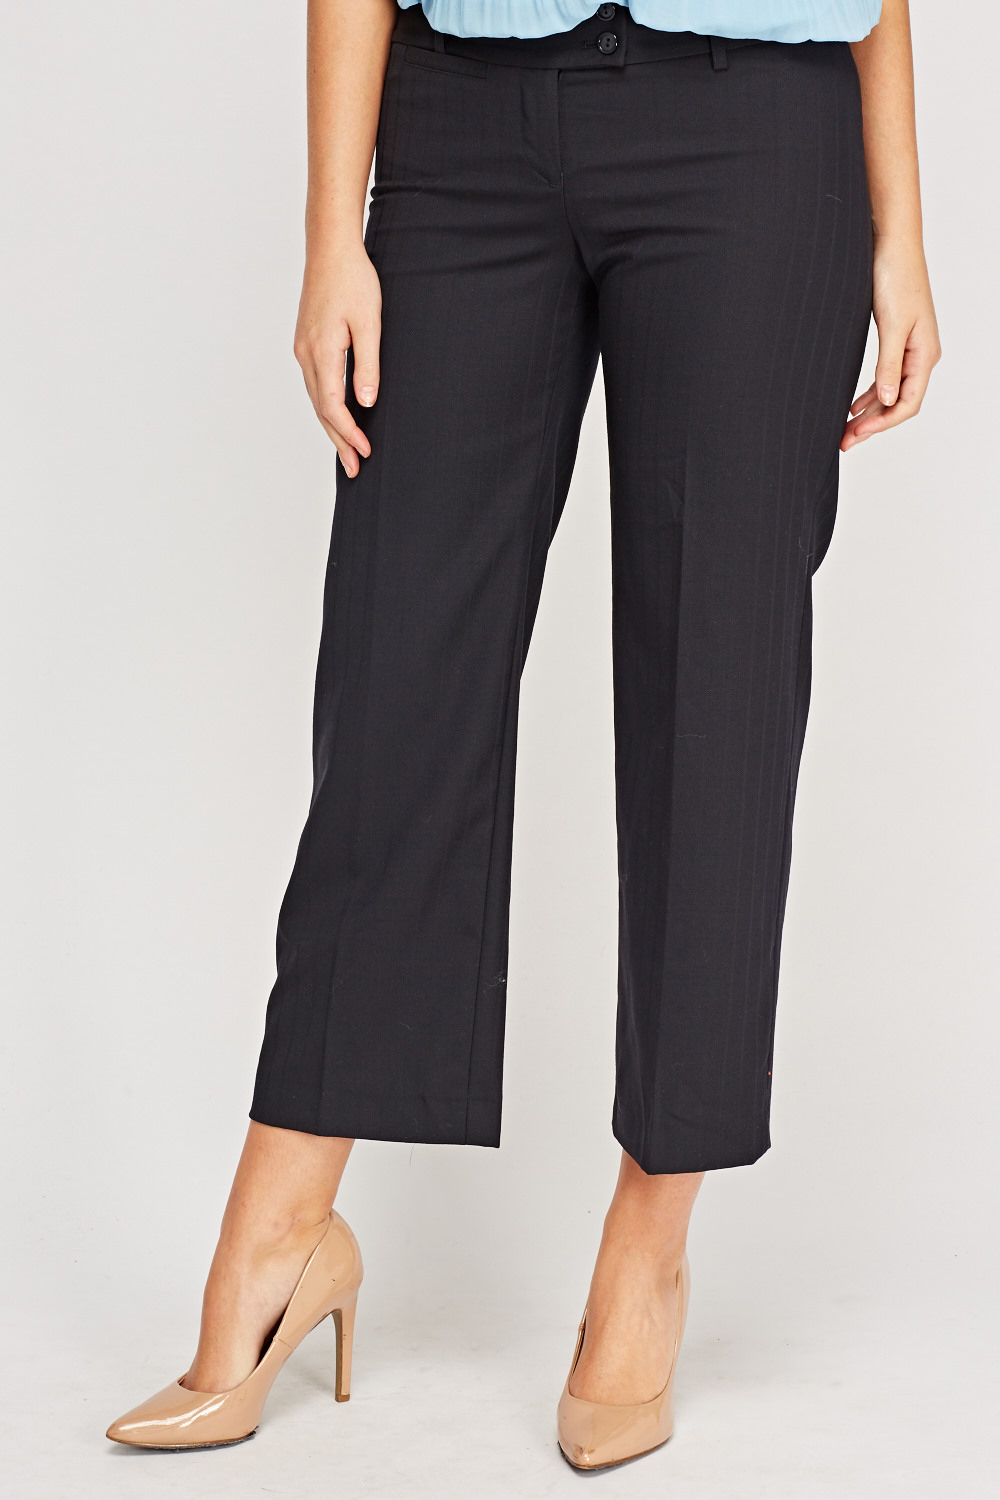 Navy Pinstripe Formal Trousers - Just $7